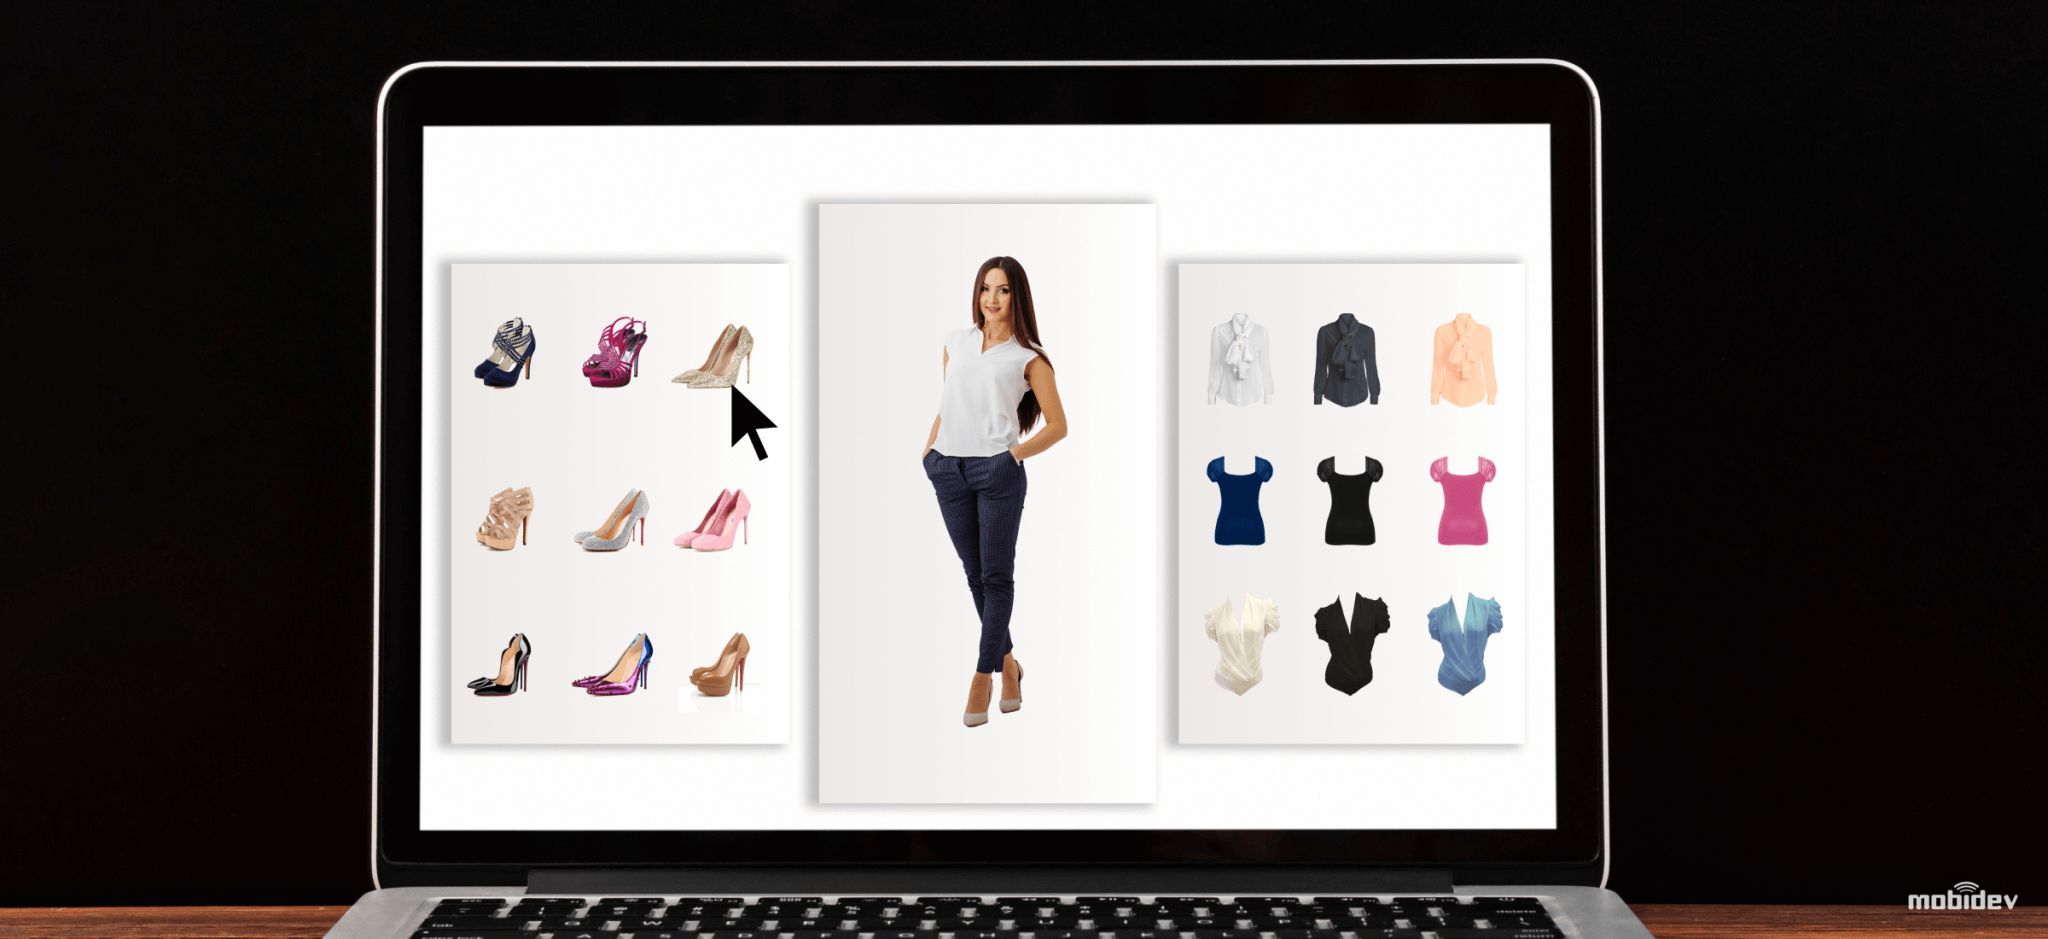 featured image - Virtual Fitting Room Technologies To Boost Retail Sales in a Post COVID-19 World